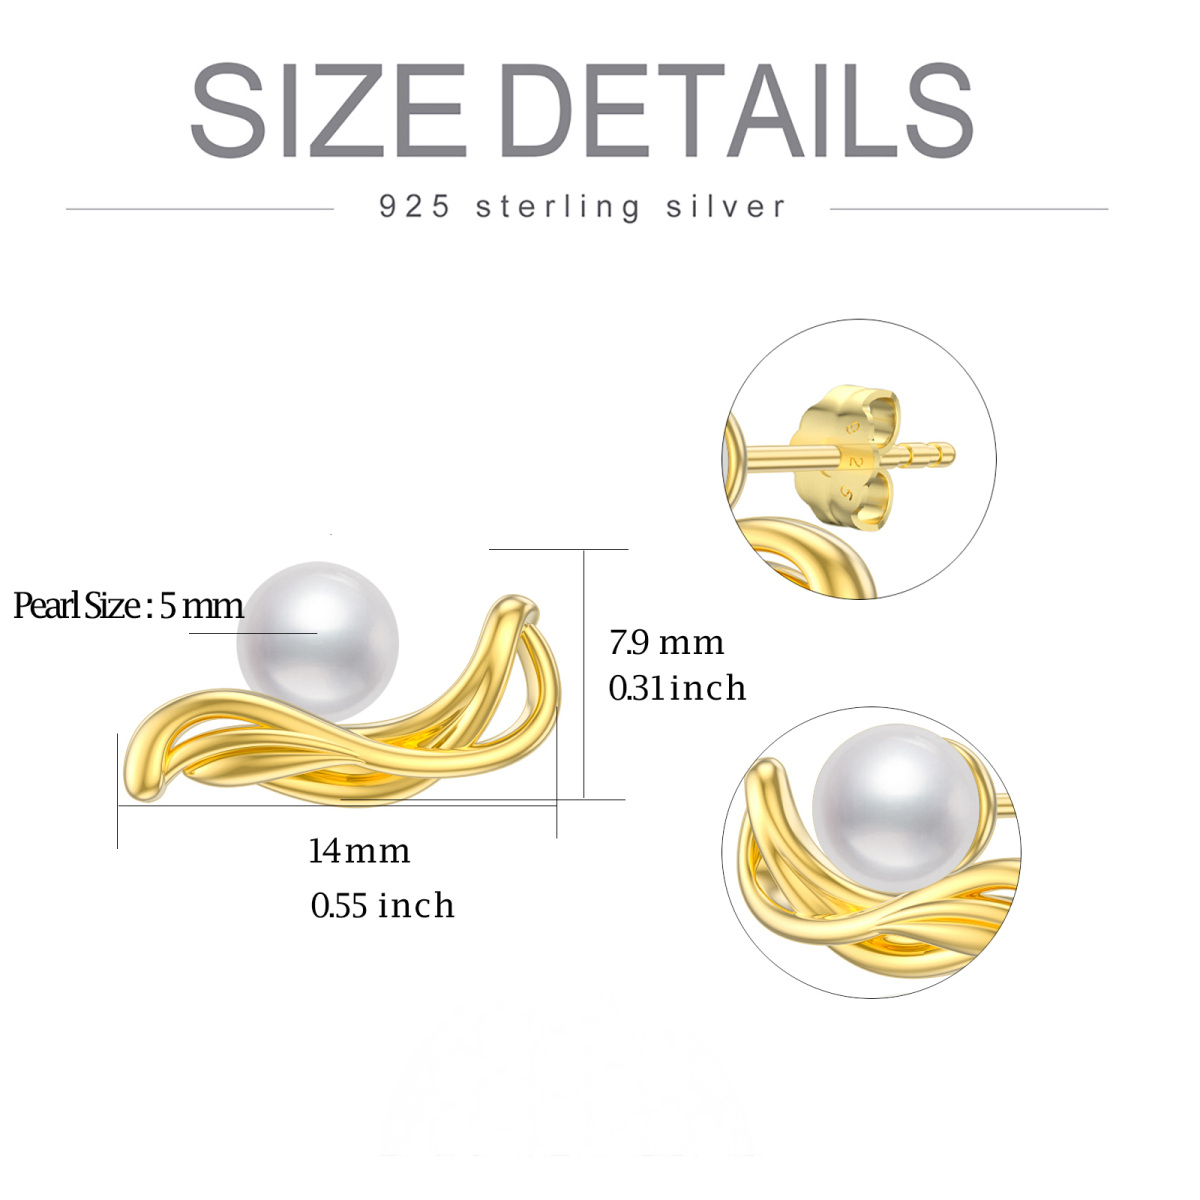 Gold Plated Irregular Pearl Stud Earrings Sterling Silver Gifts For Women Girls-5